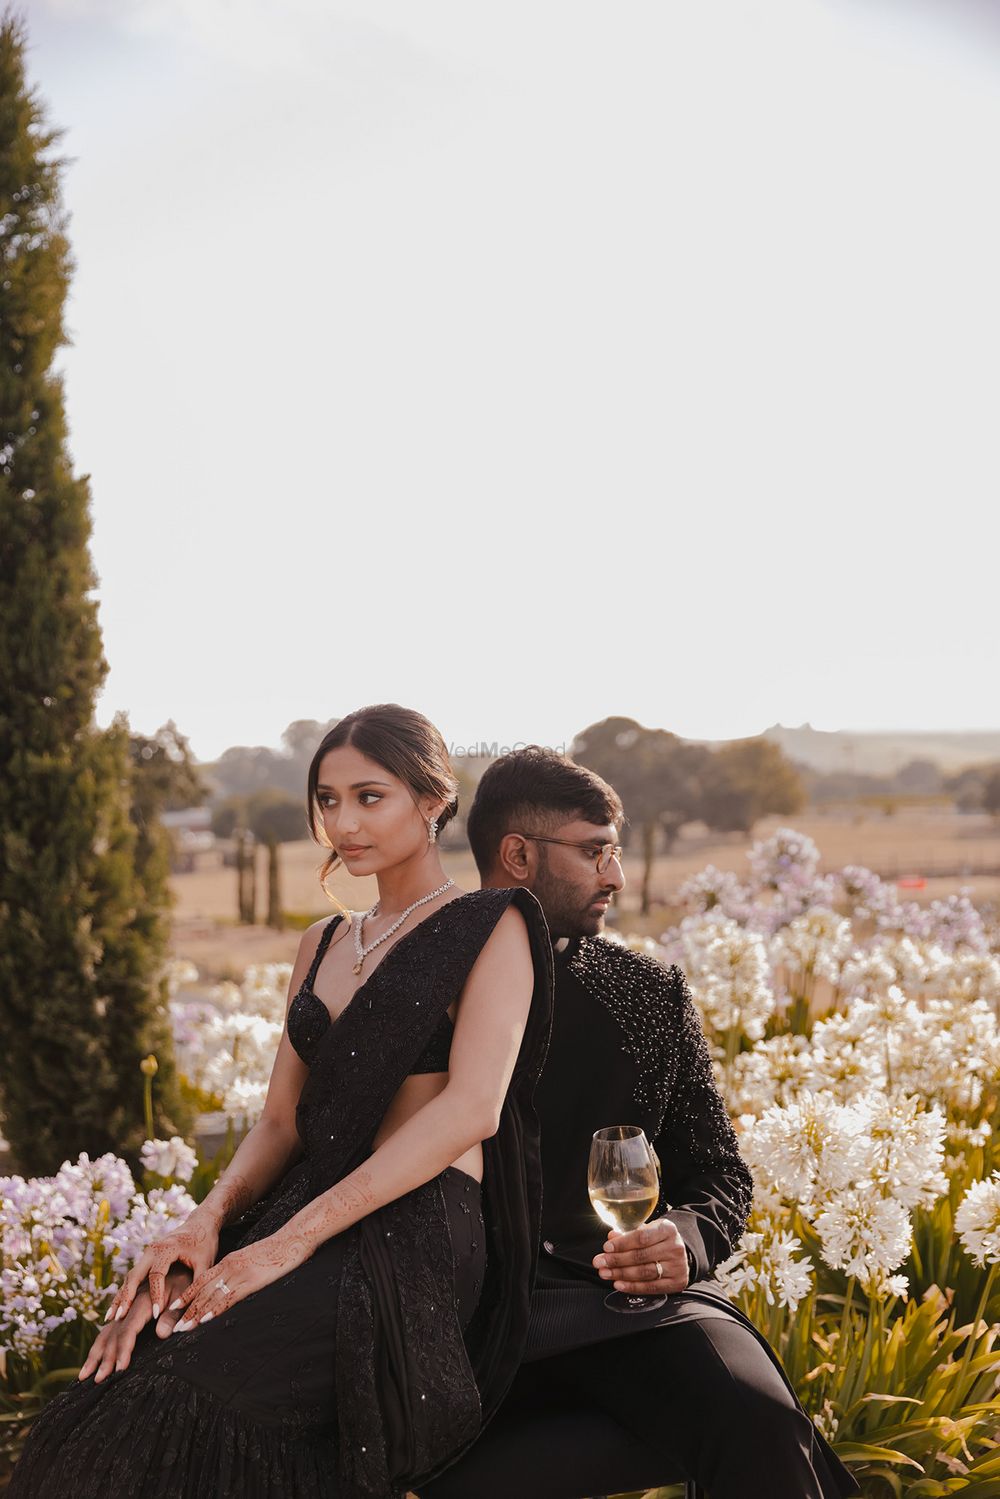 Photo of Gorgeous couple portrait with the couple in co-ordinated black outfits in a field of flowers